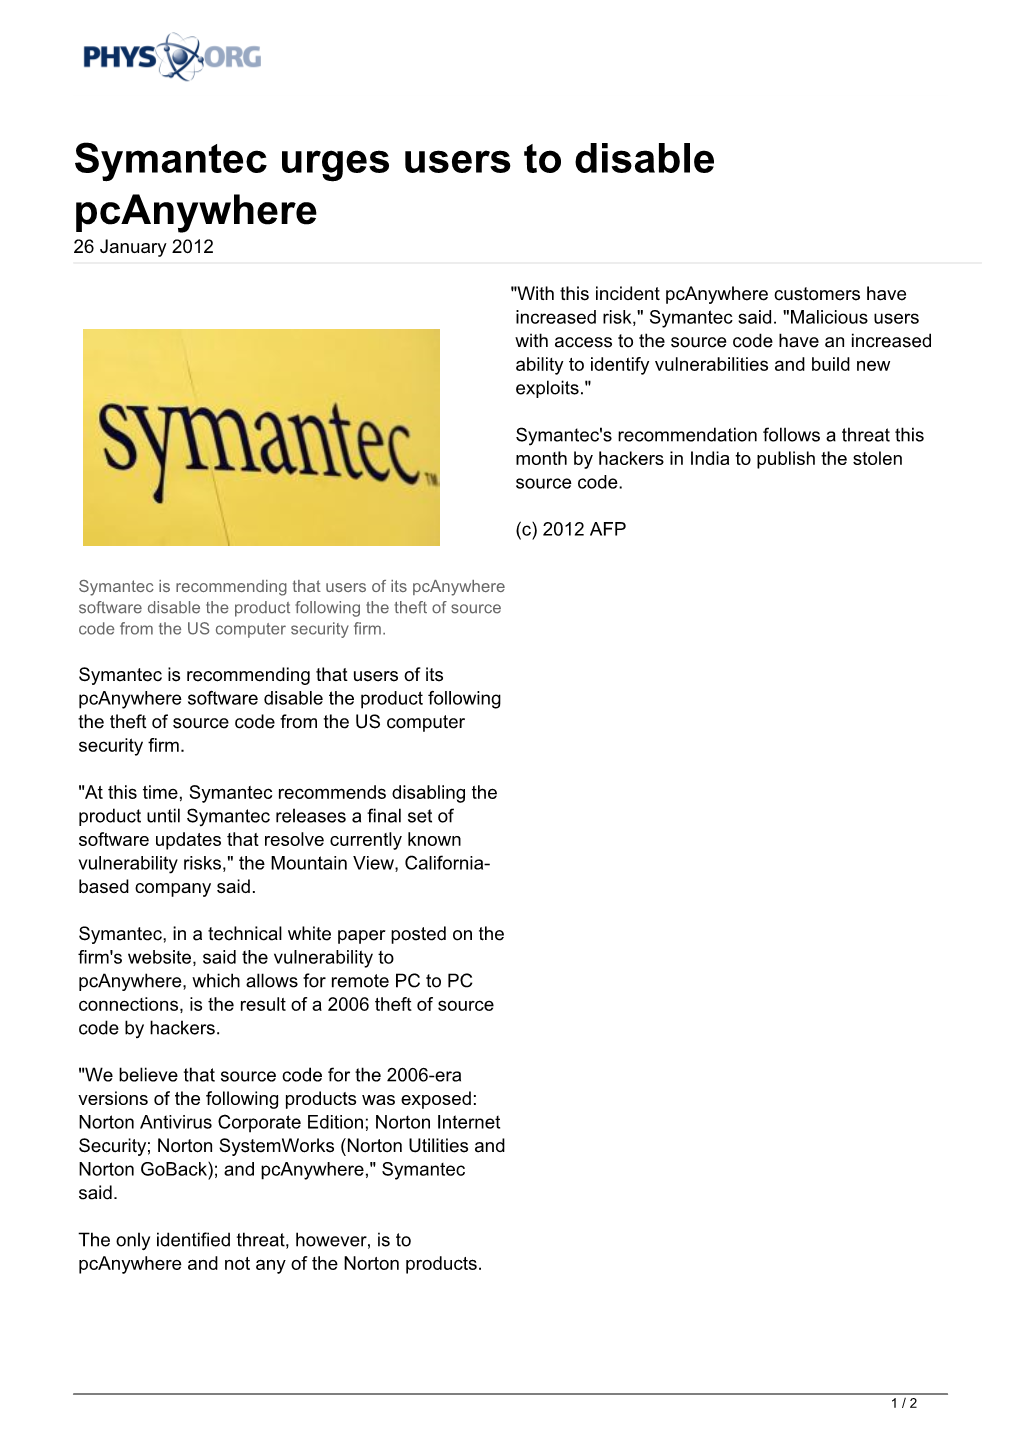 Symantec Urges Users to Disable Pcanywhere 26 January 2012